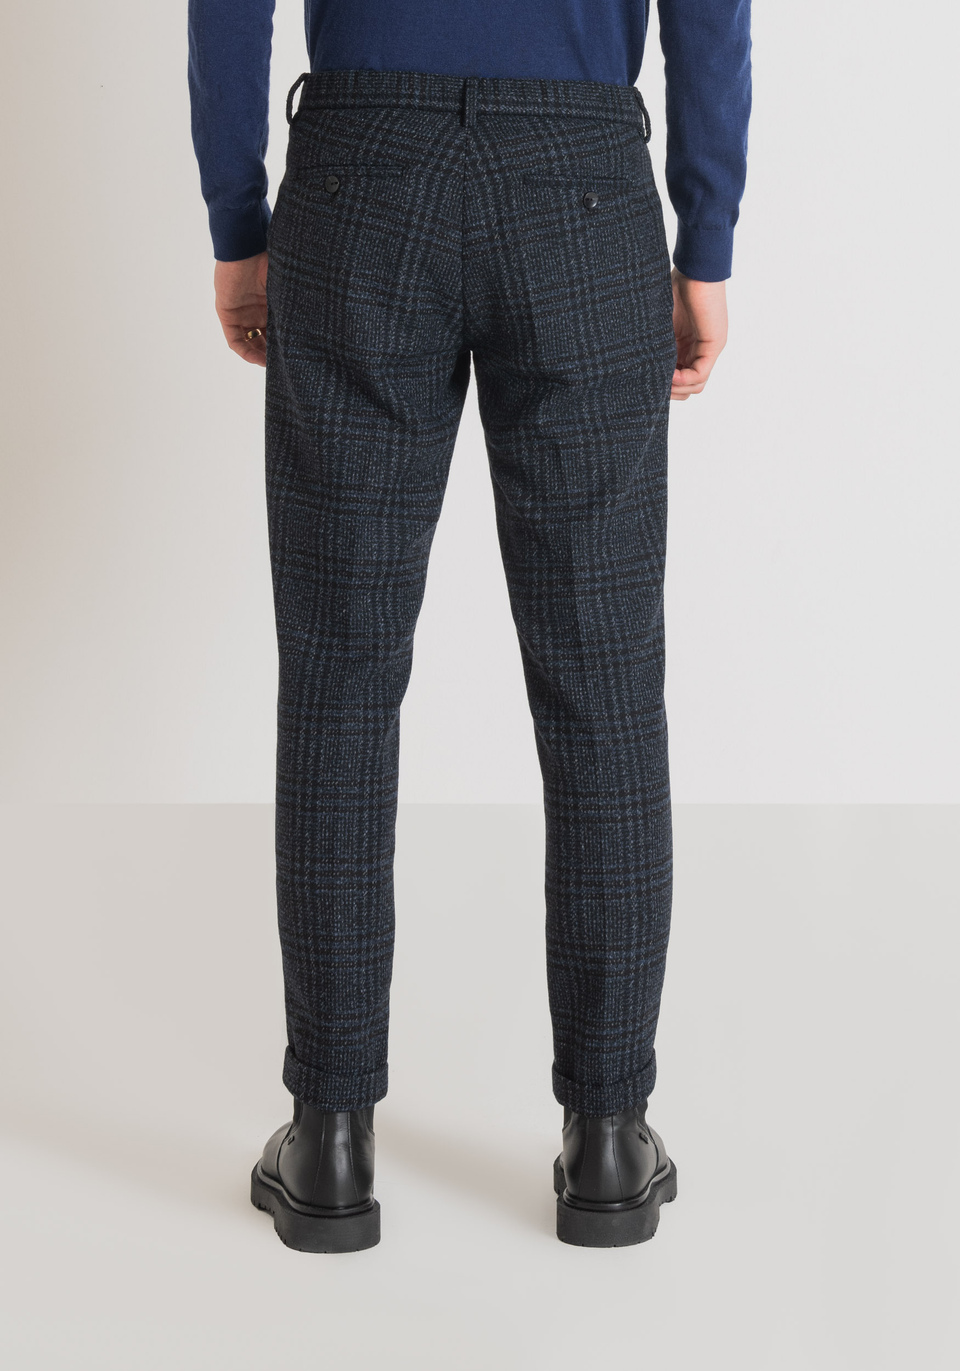 "GUSTAF" CARROT FIT TROUSERS IN WOOL BLEND WITH PRINCE OF WALES PATTERN - Antony Morato Online Shop